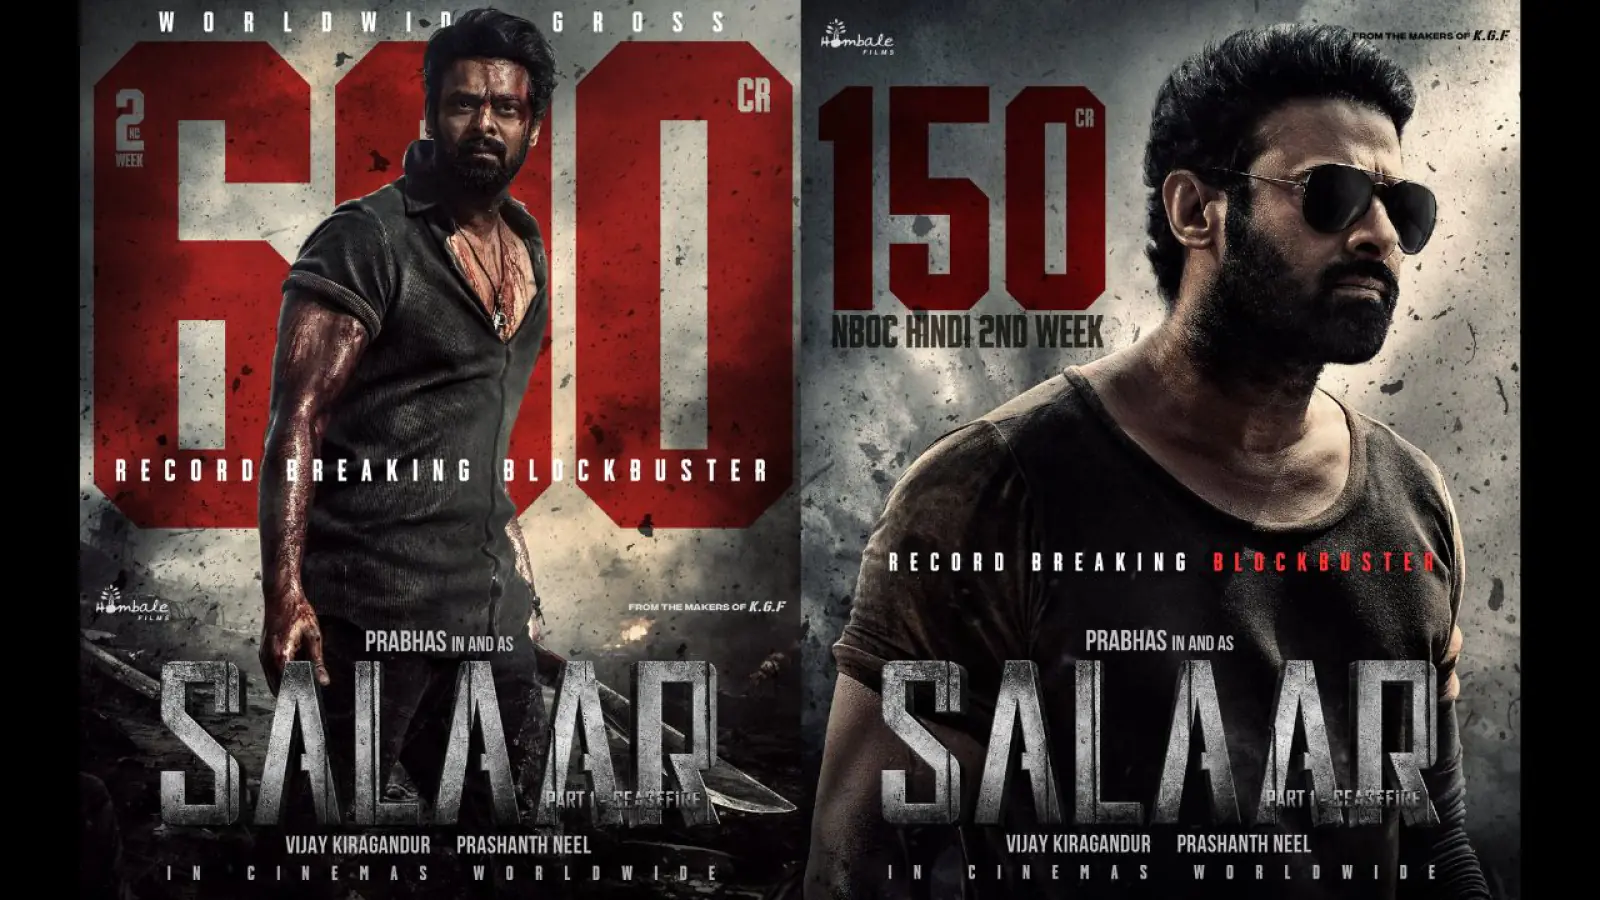 Action-packed 'Salaar' Crosses 625 Crore at Box Office, Hindi Version Grossed Over 150 Crore